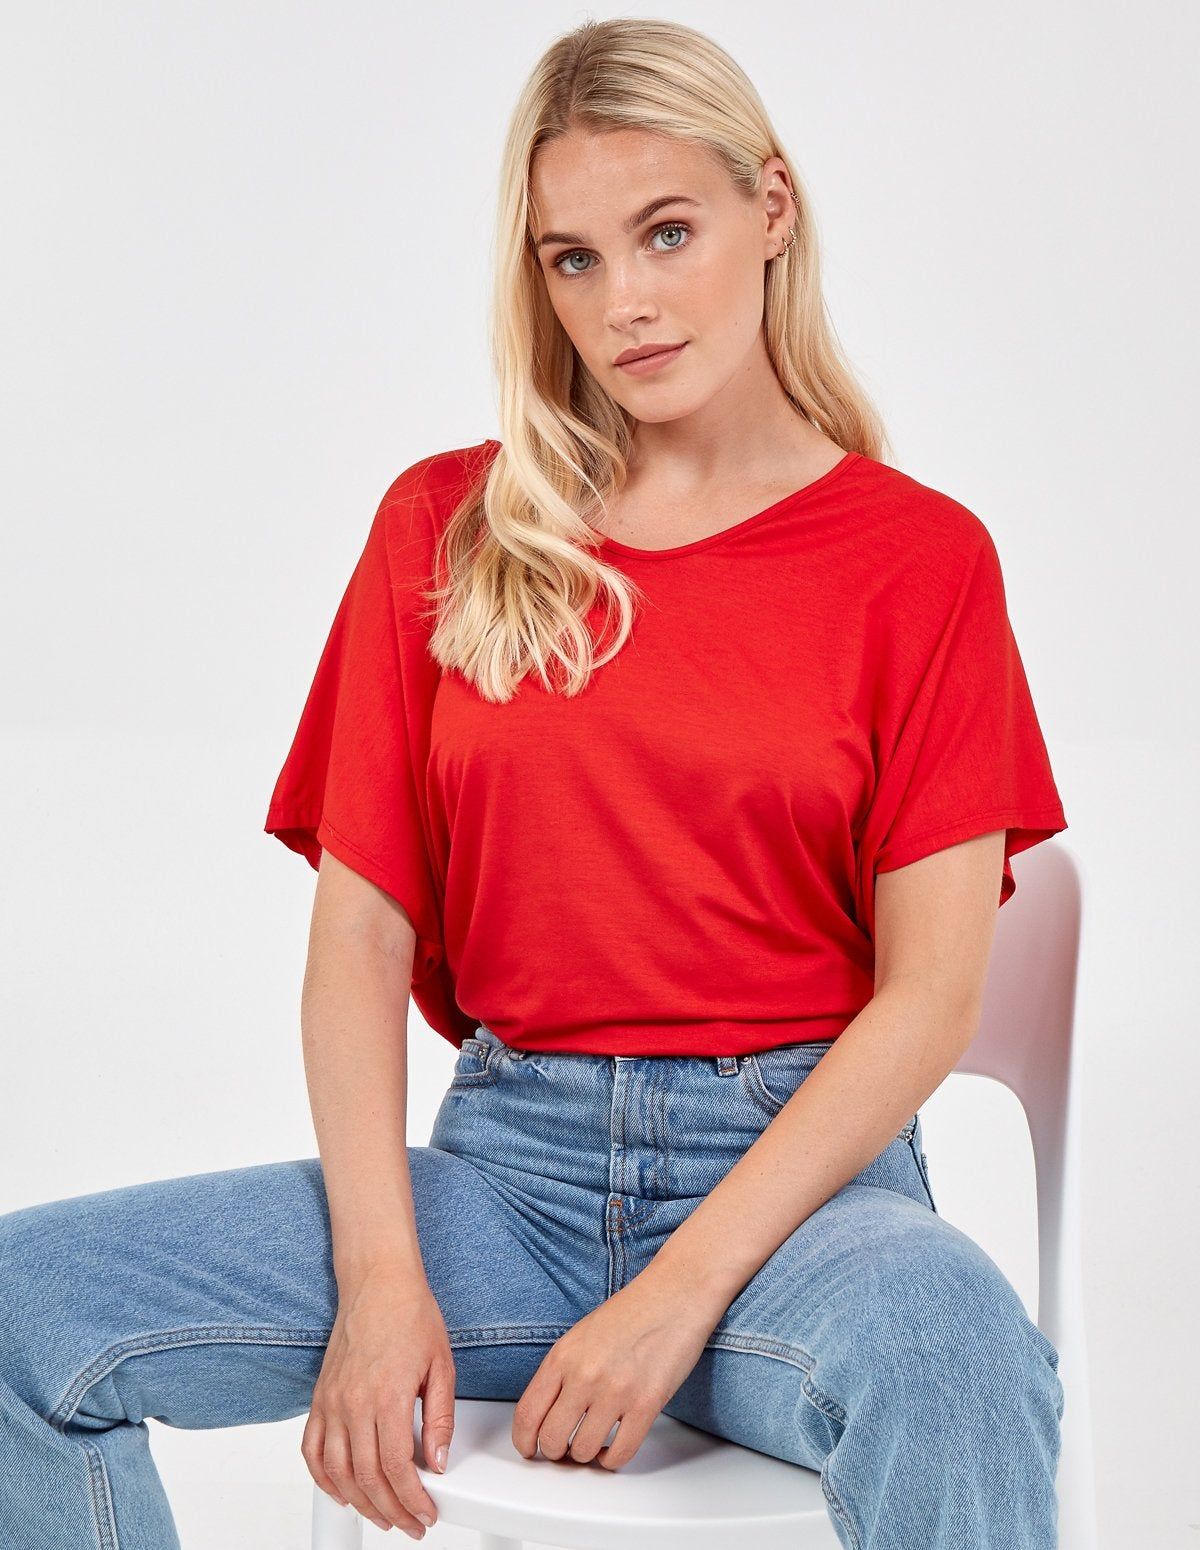 Keep it simple with this casual oversized top. Pair with jeans, chunky trainers and a headband for an easy day to night look!